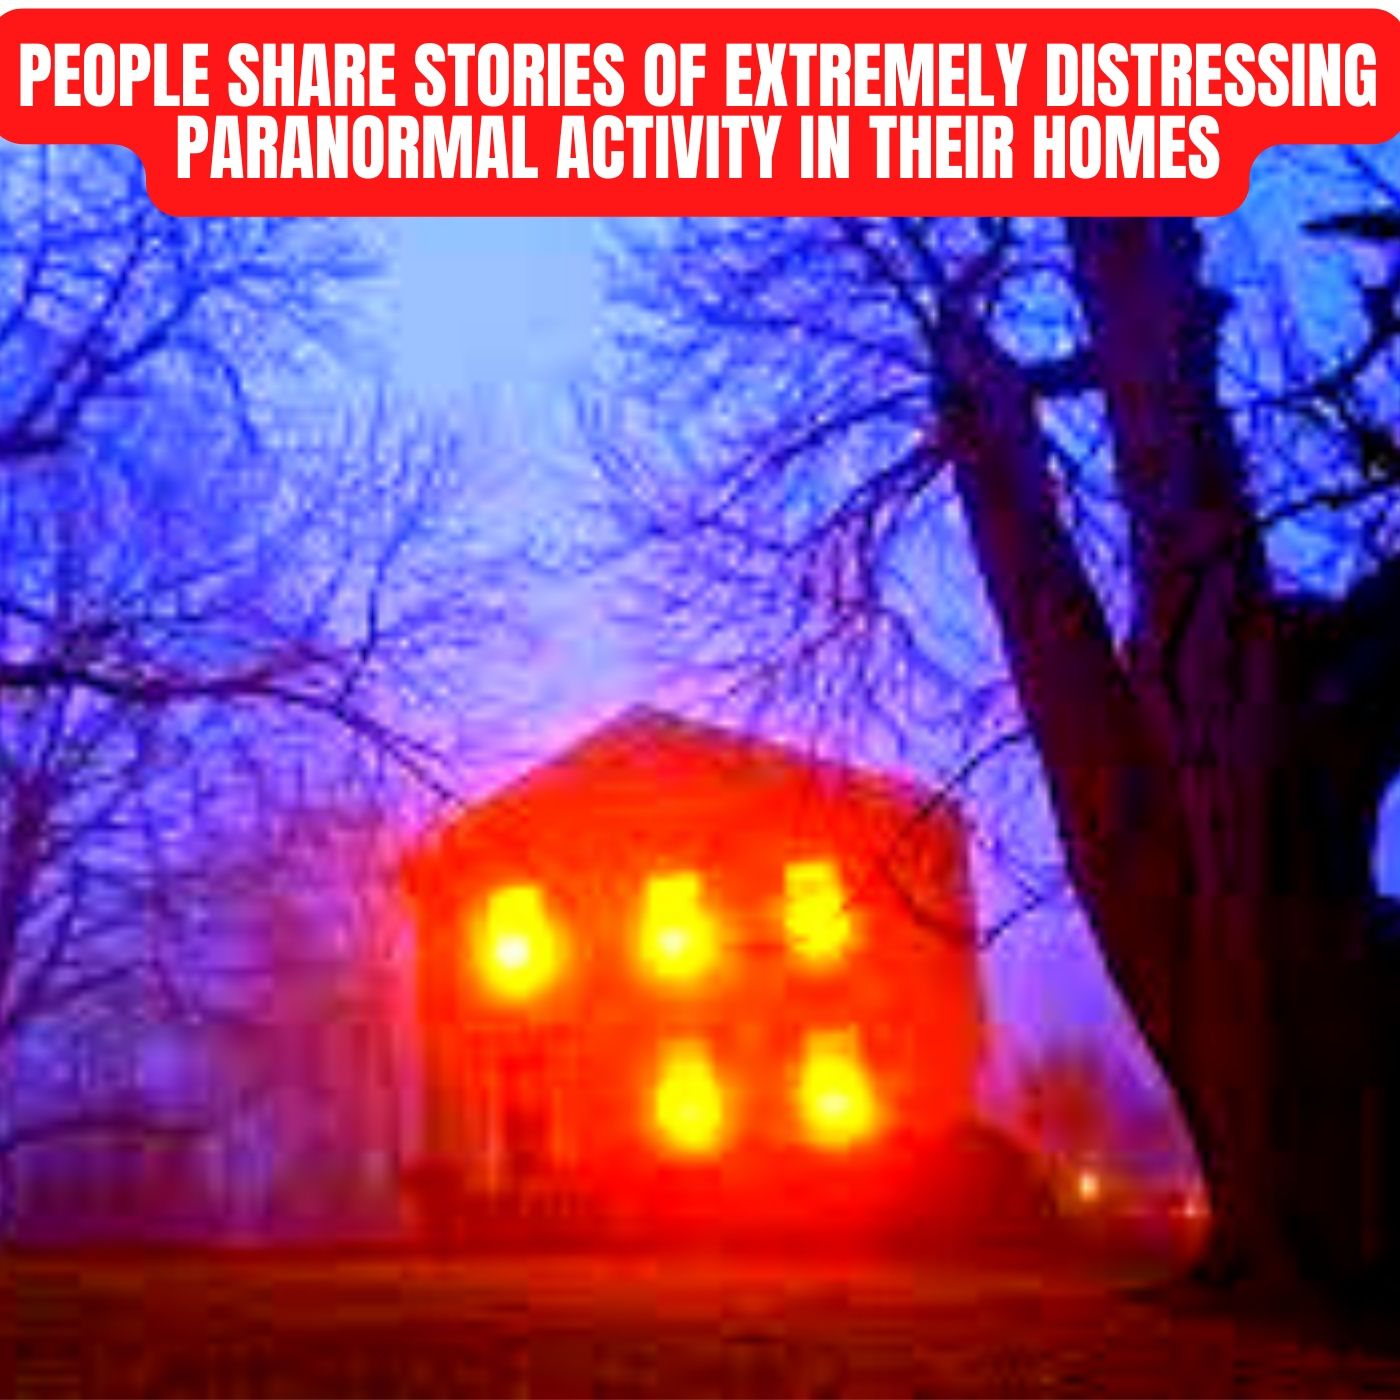 People Share Stories of Extremely Distressing Paranormal Activity in their Homes